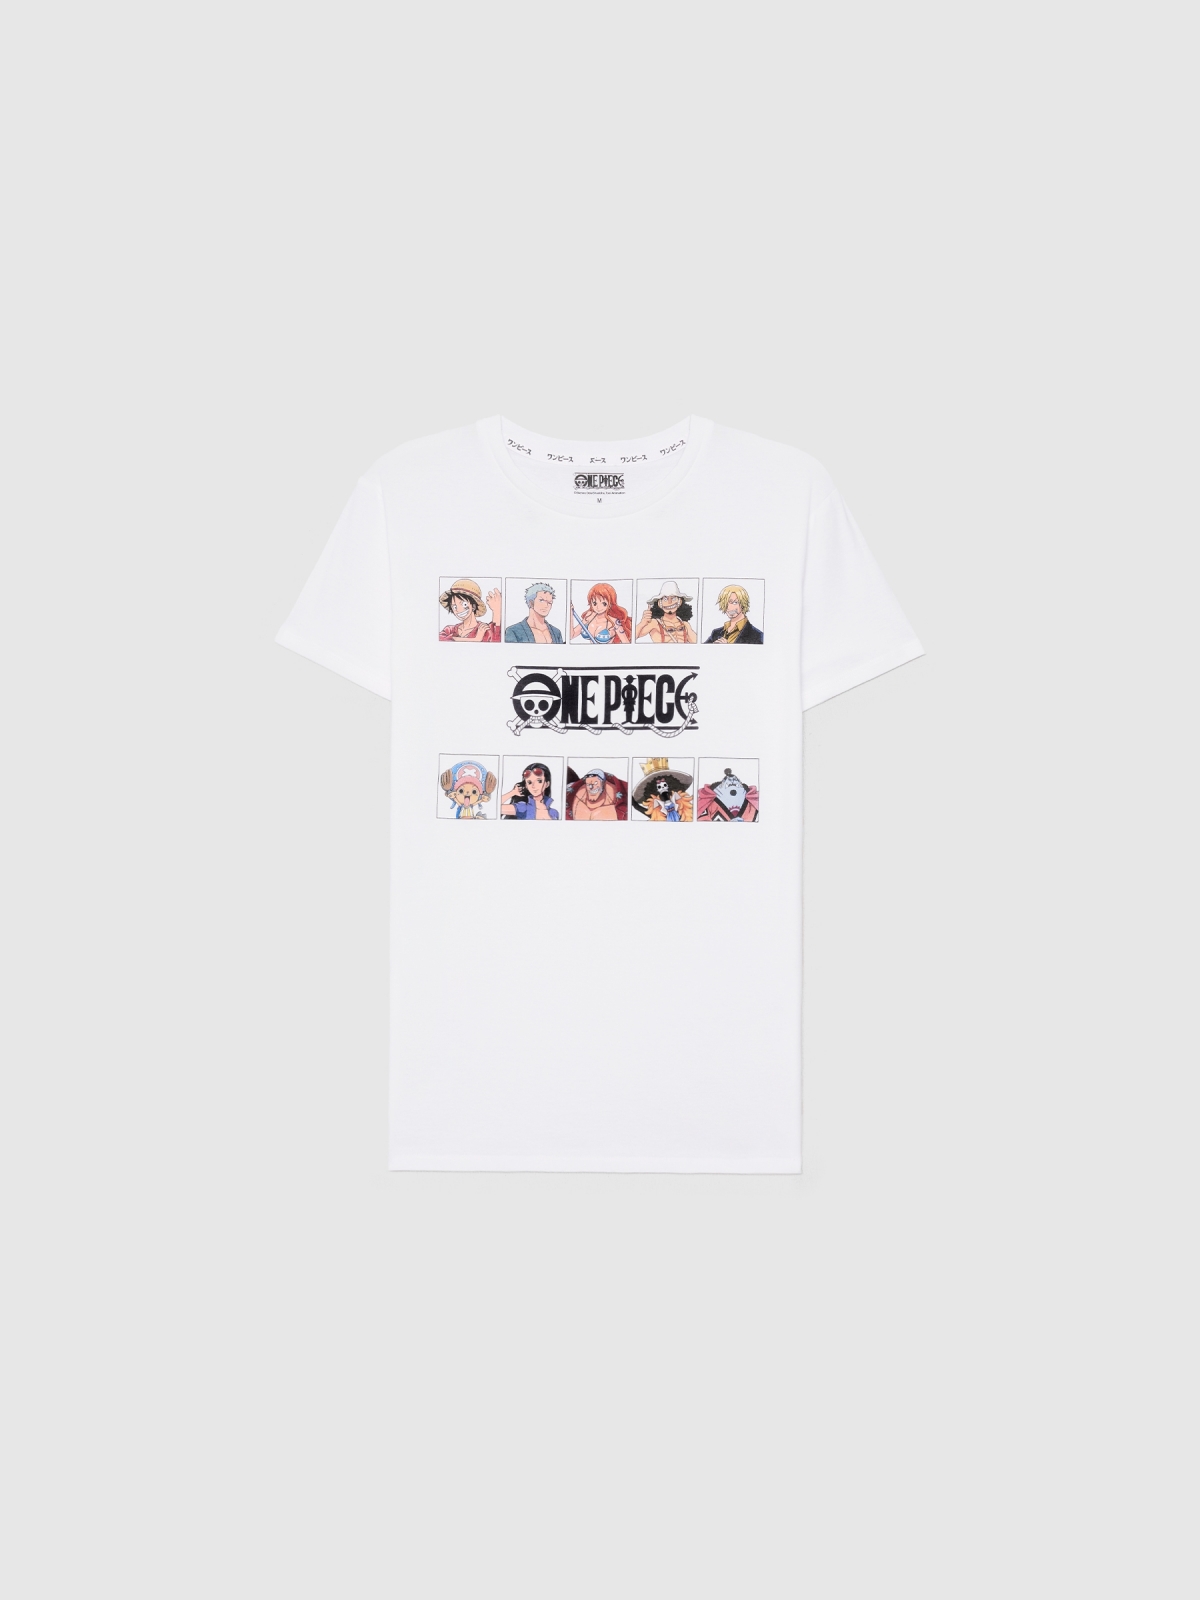  One Piece character t-shirt white